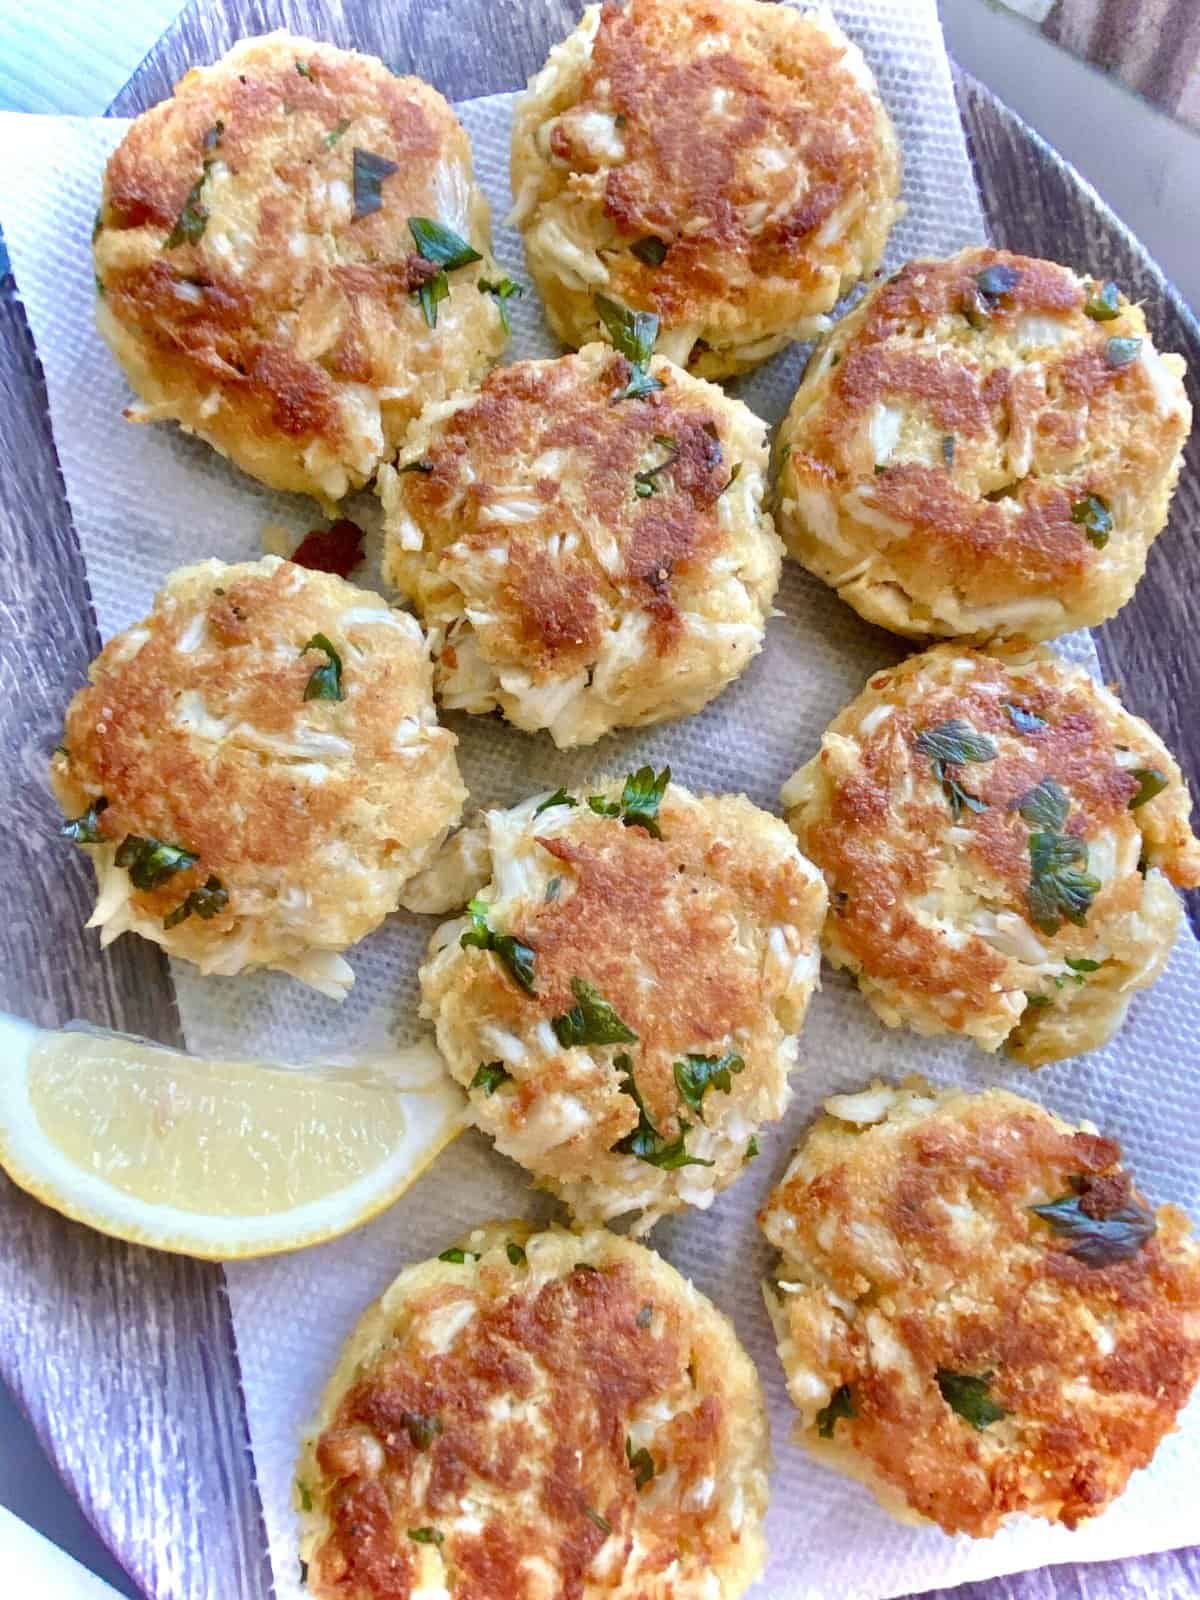 Easy Crab Cakes Recipe: How to Make It